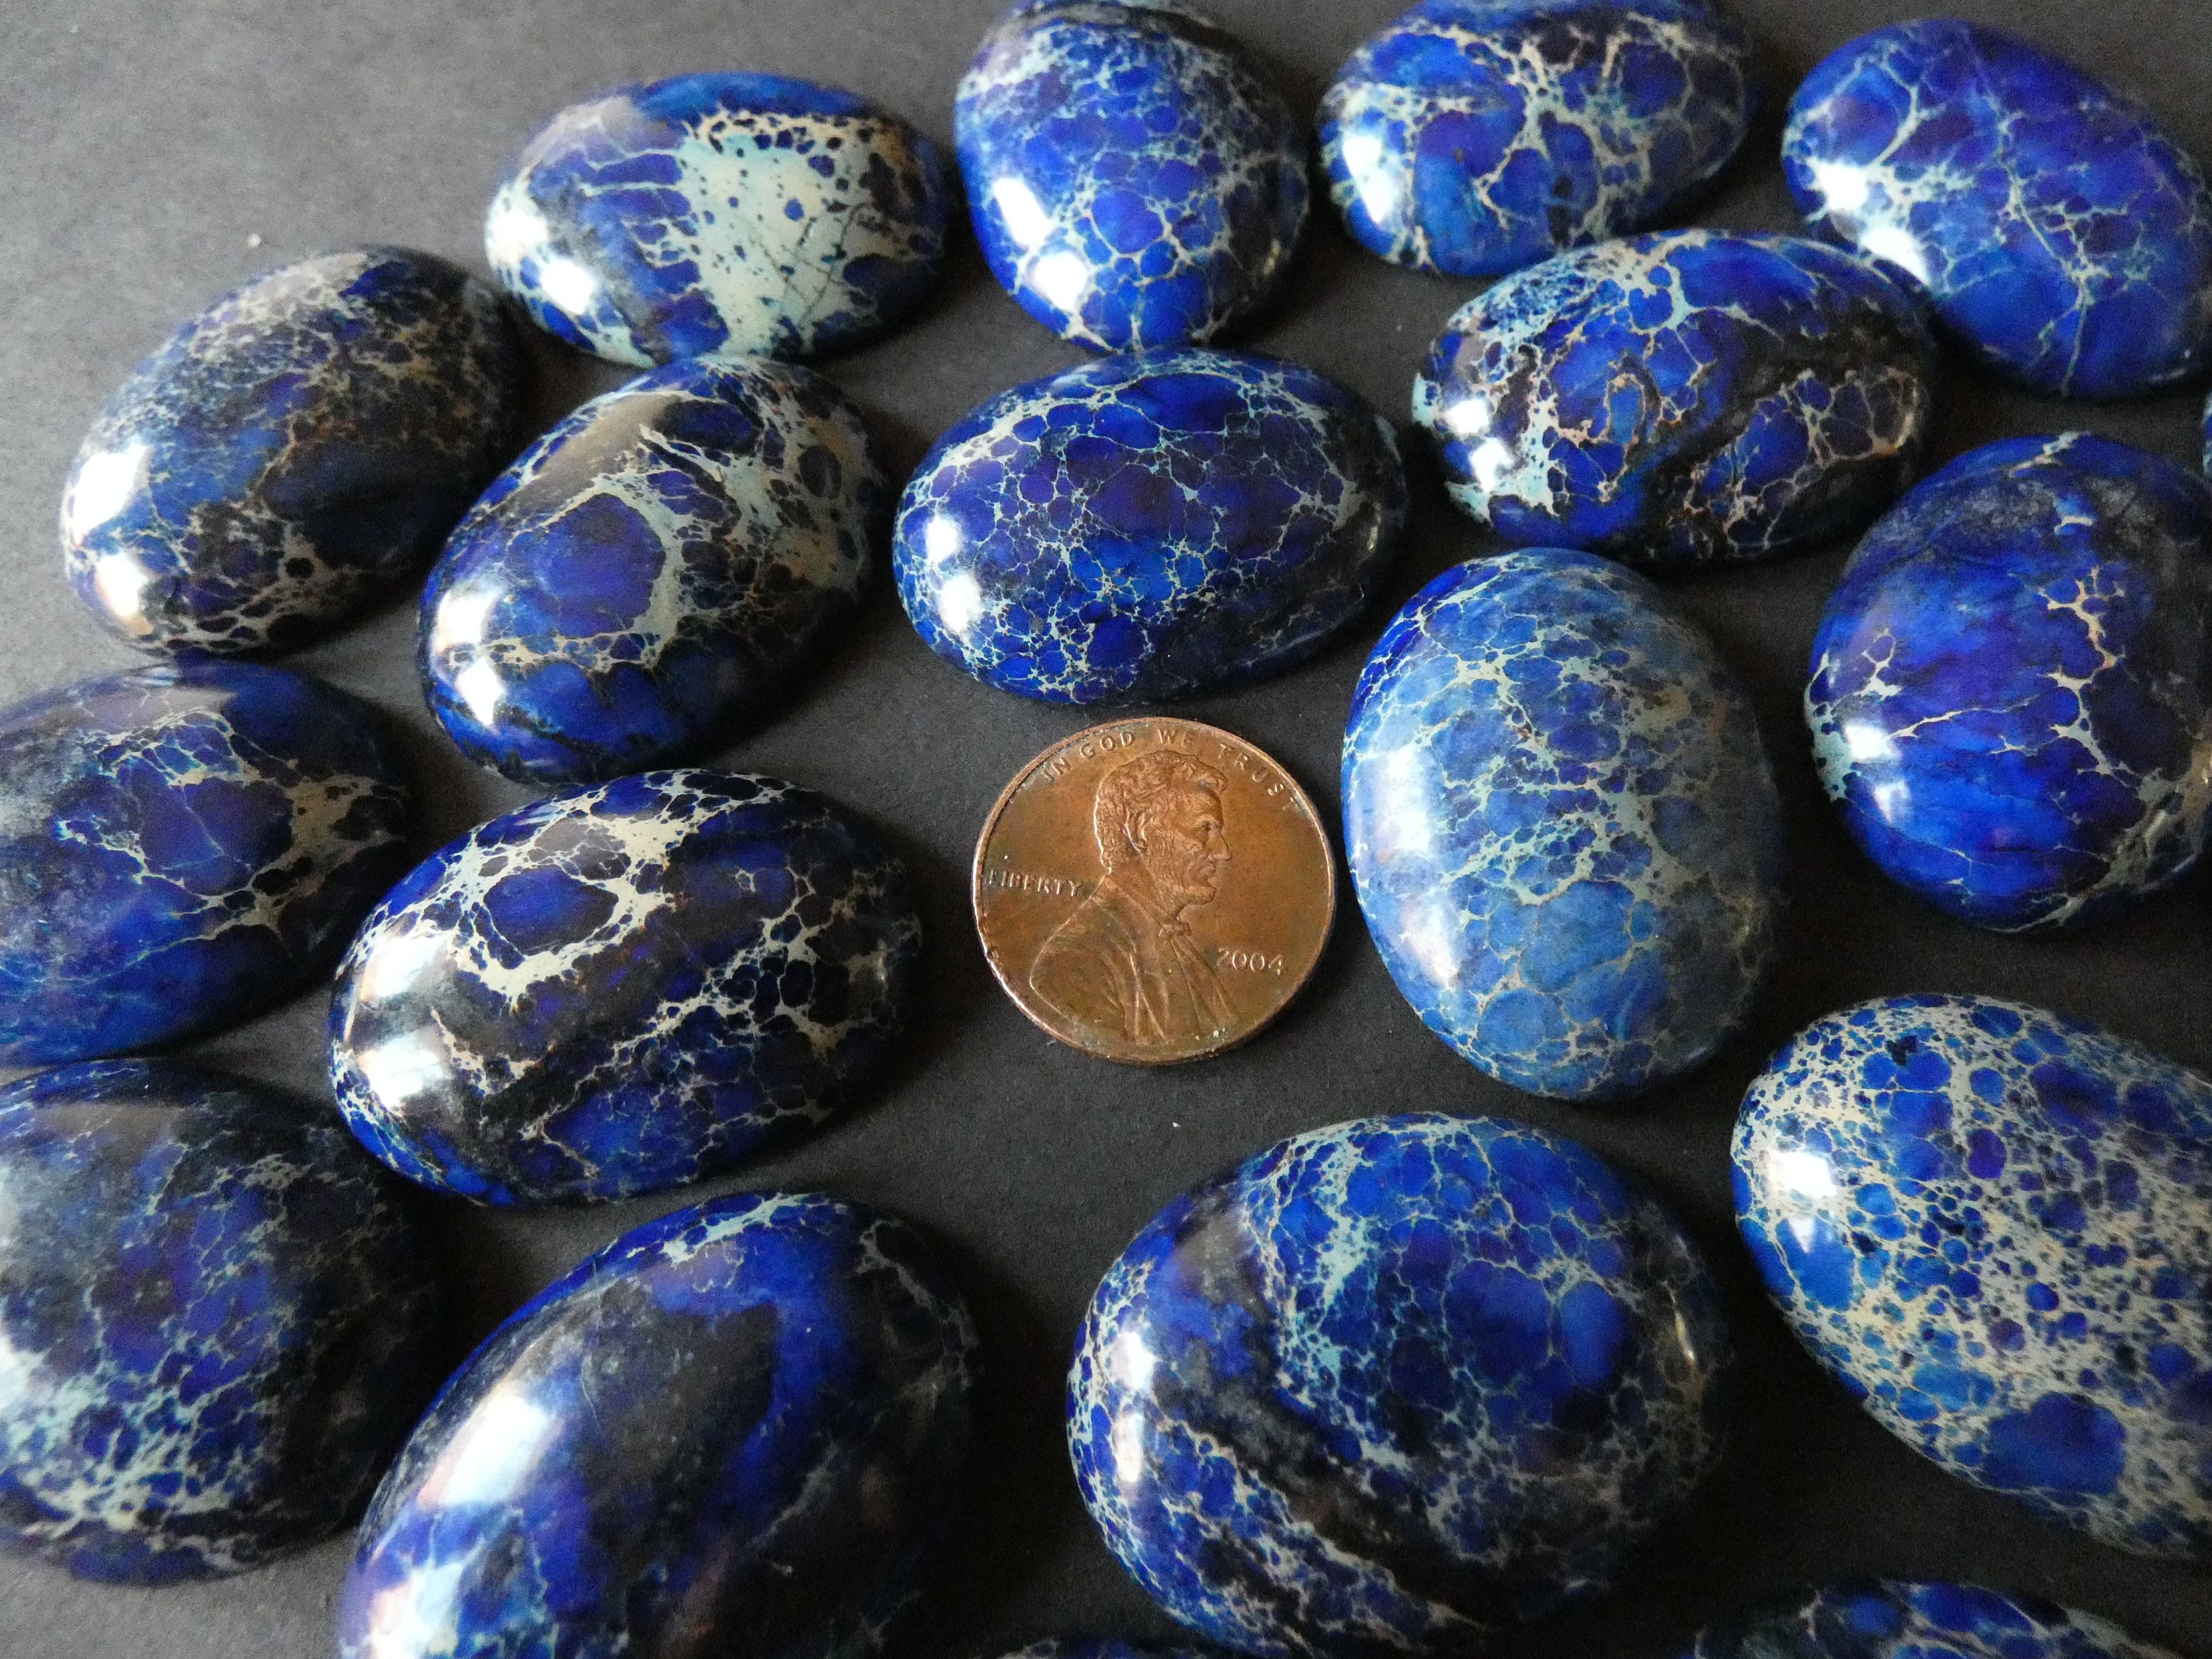 30x22mm Regalite Cabochon, Dyed Oval Cabochon, Polished Regalite Stone ...